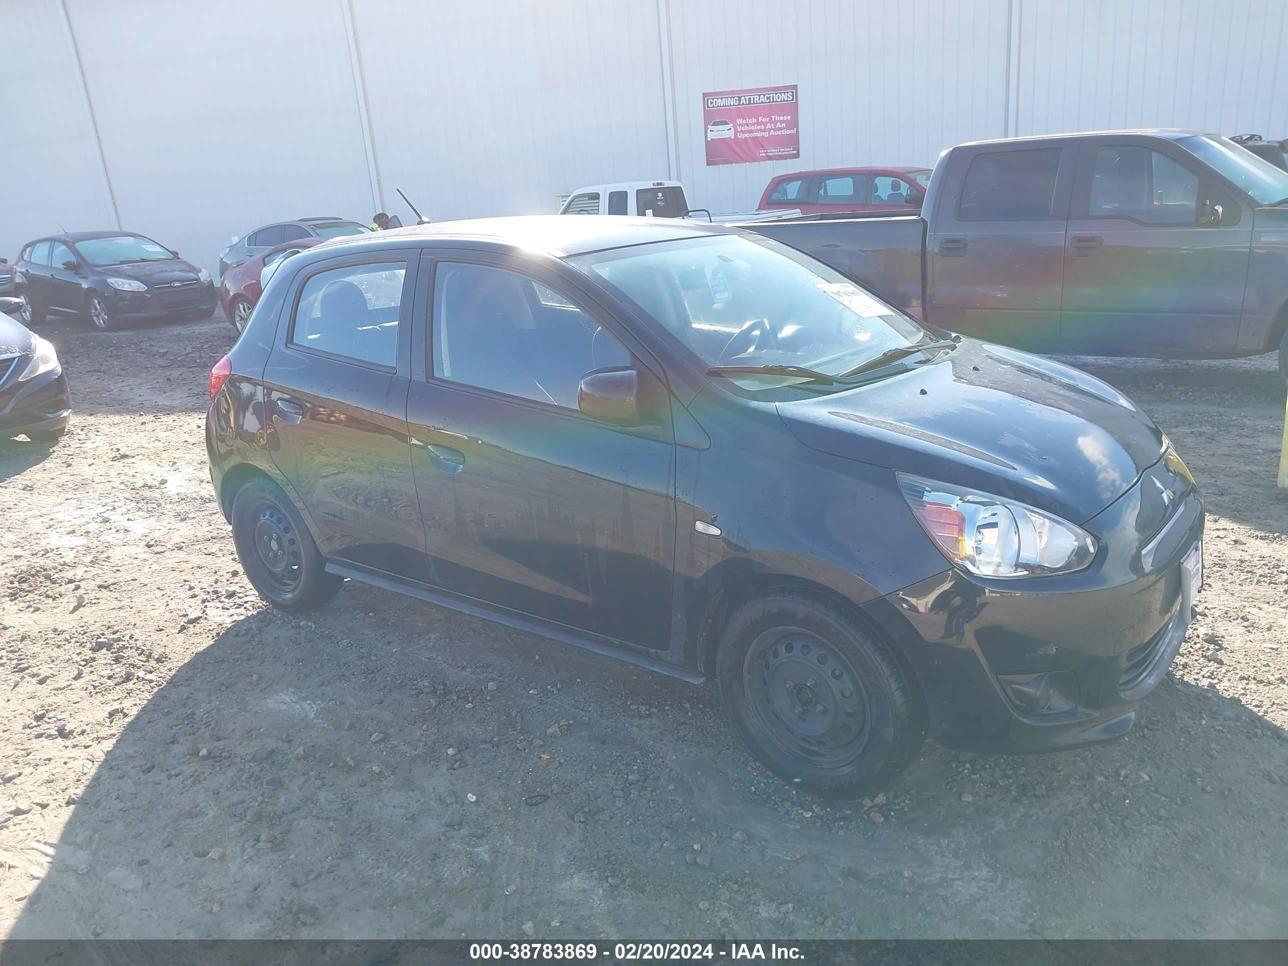 vin: ML32A3HJ2FH056314 ML32A3HJ2FH056314 2015 mitsubishi mirage 1200 for Sale in 30680, 1045 Atlanta Hwy Se, Winder, USA